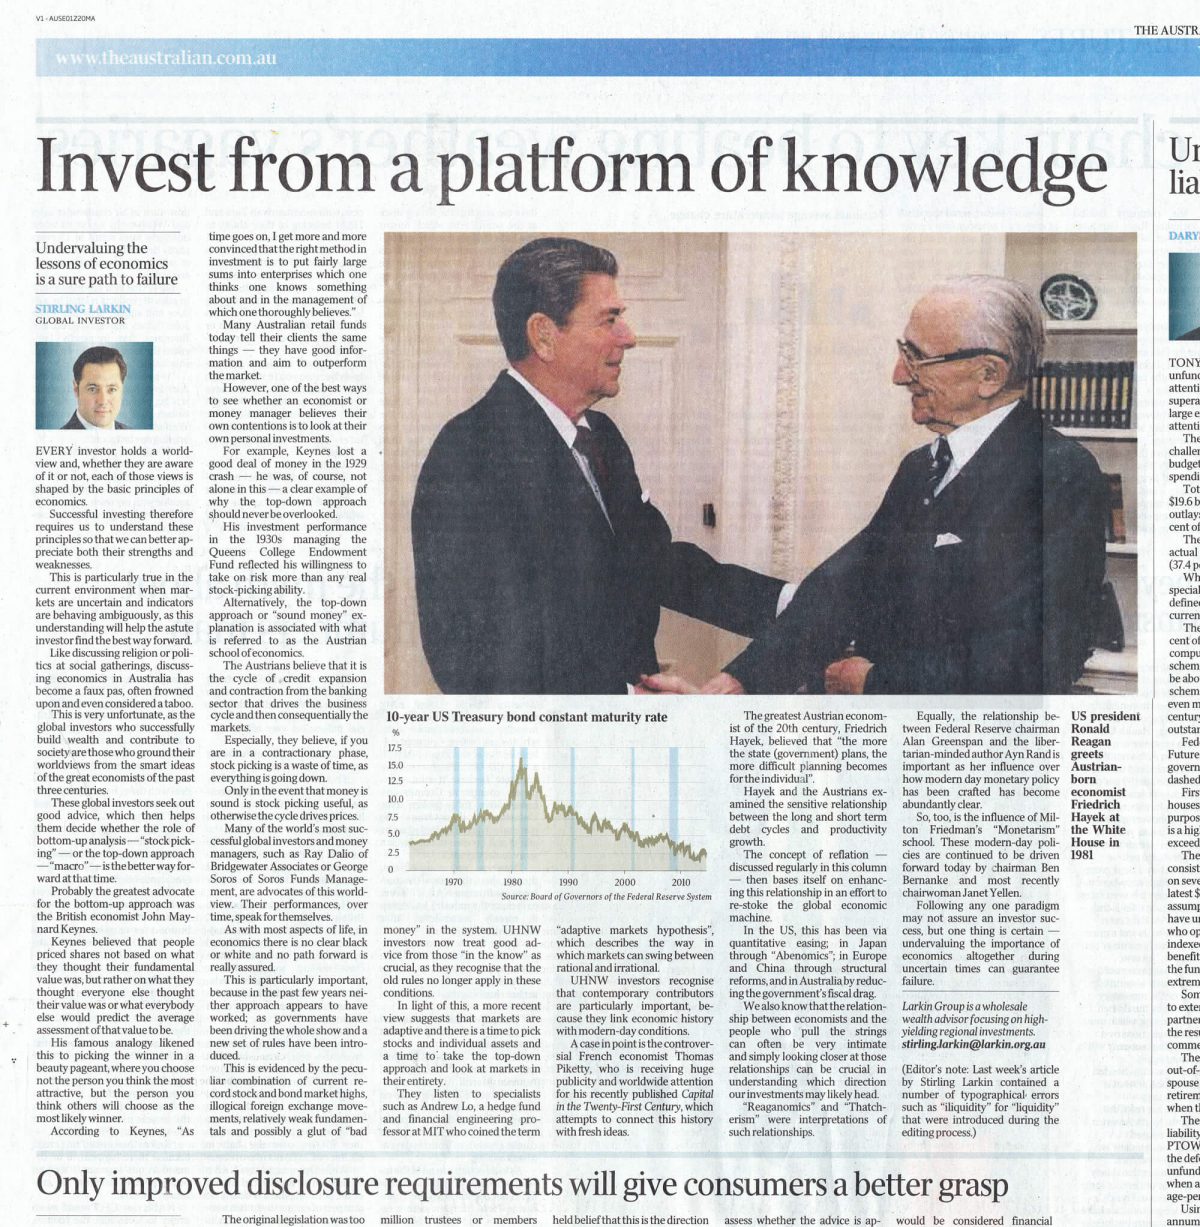 australian standfirst discusses importance of economics during uncertain times in 2014 in the australian newspaper